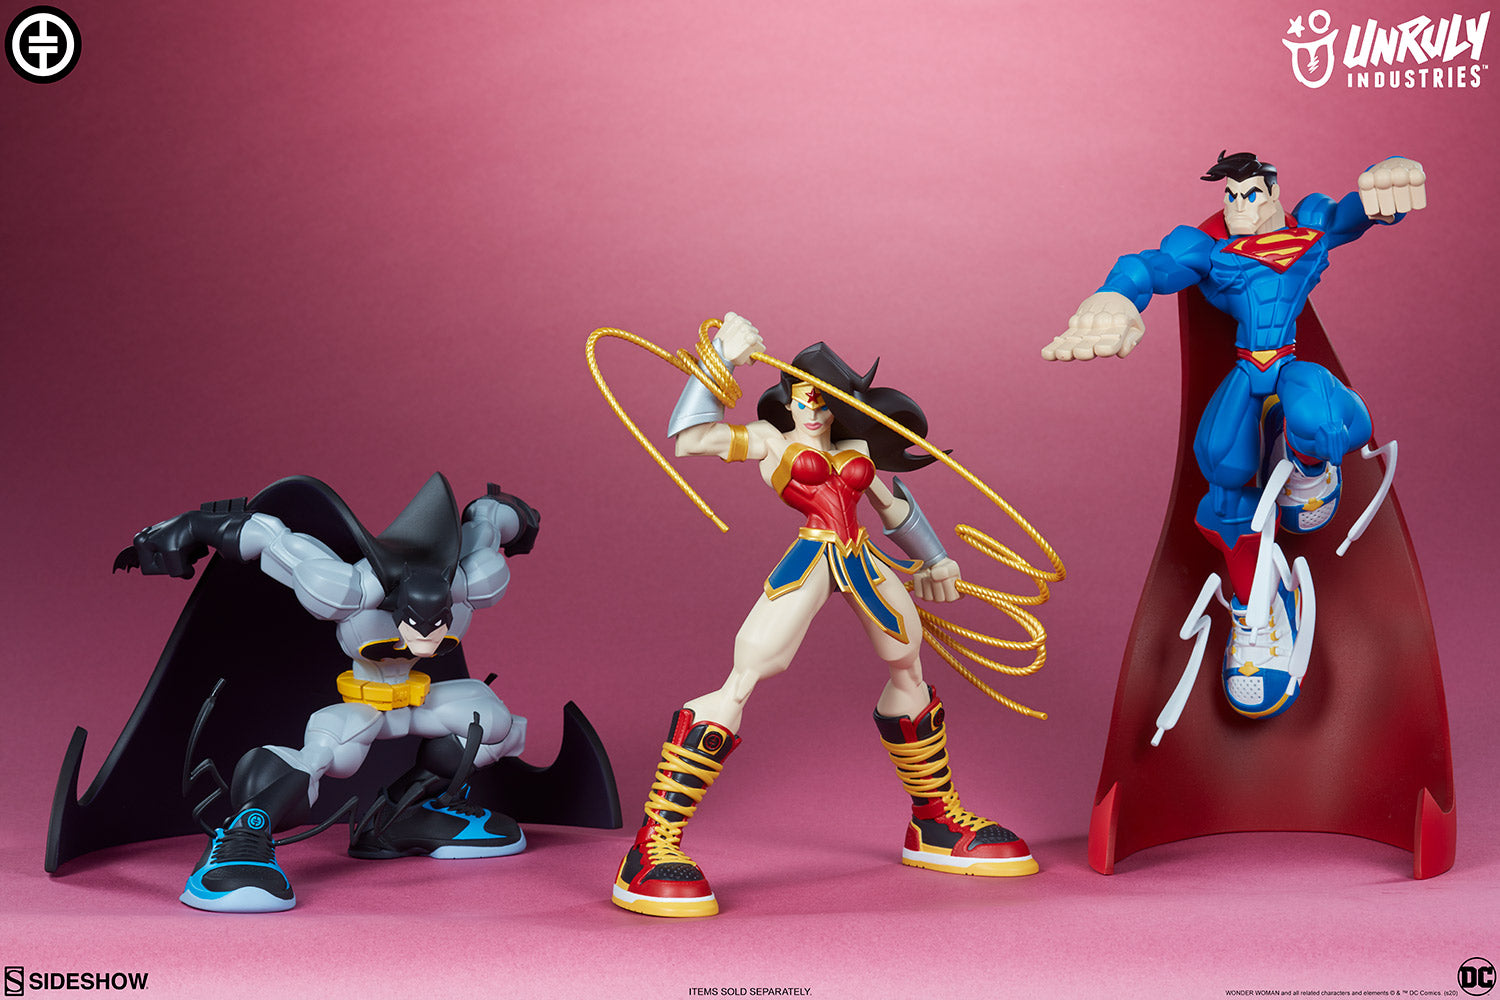 Sideshow Collectibles - Unruly Industries - Wonder Woman